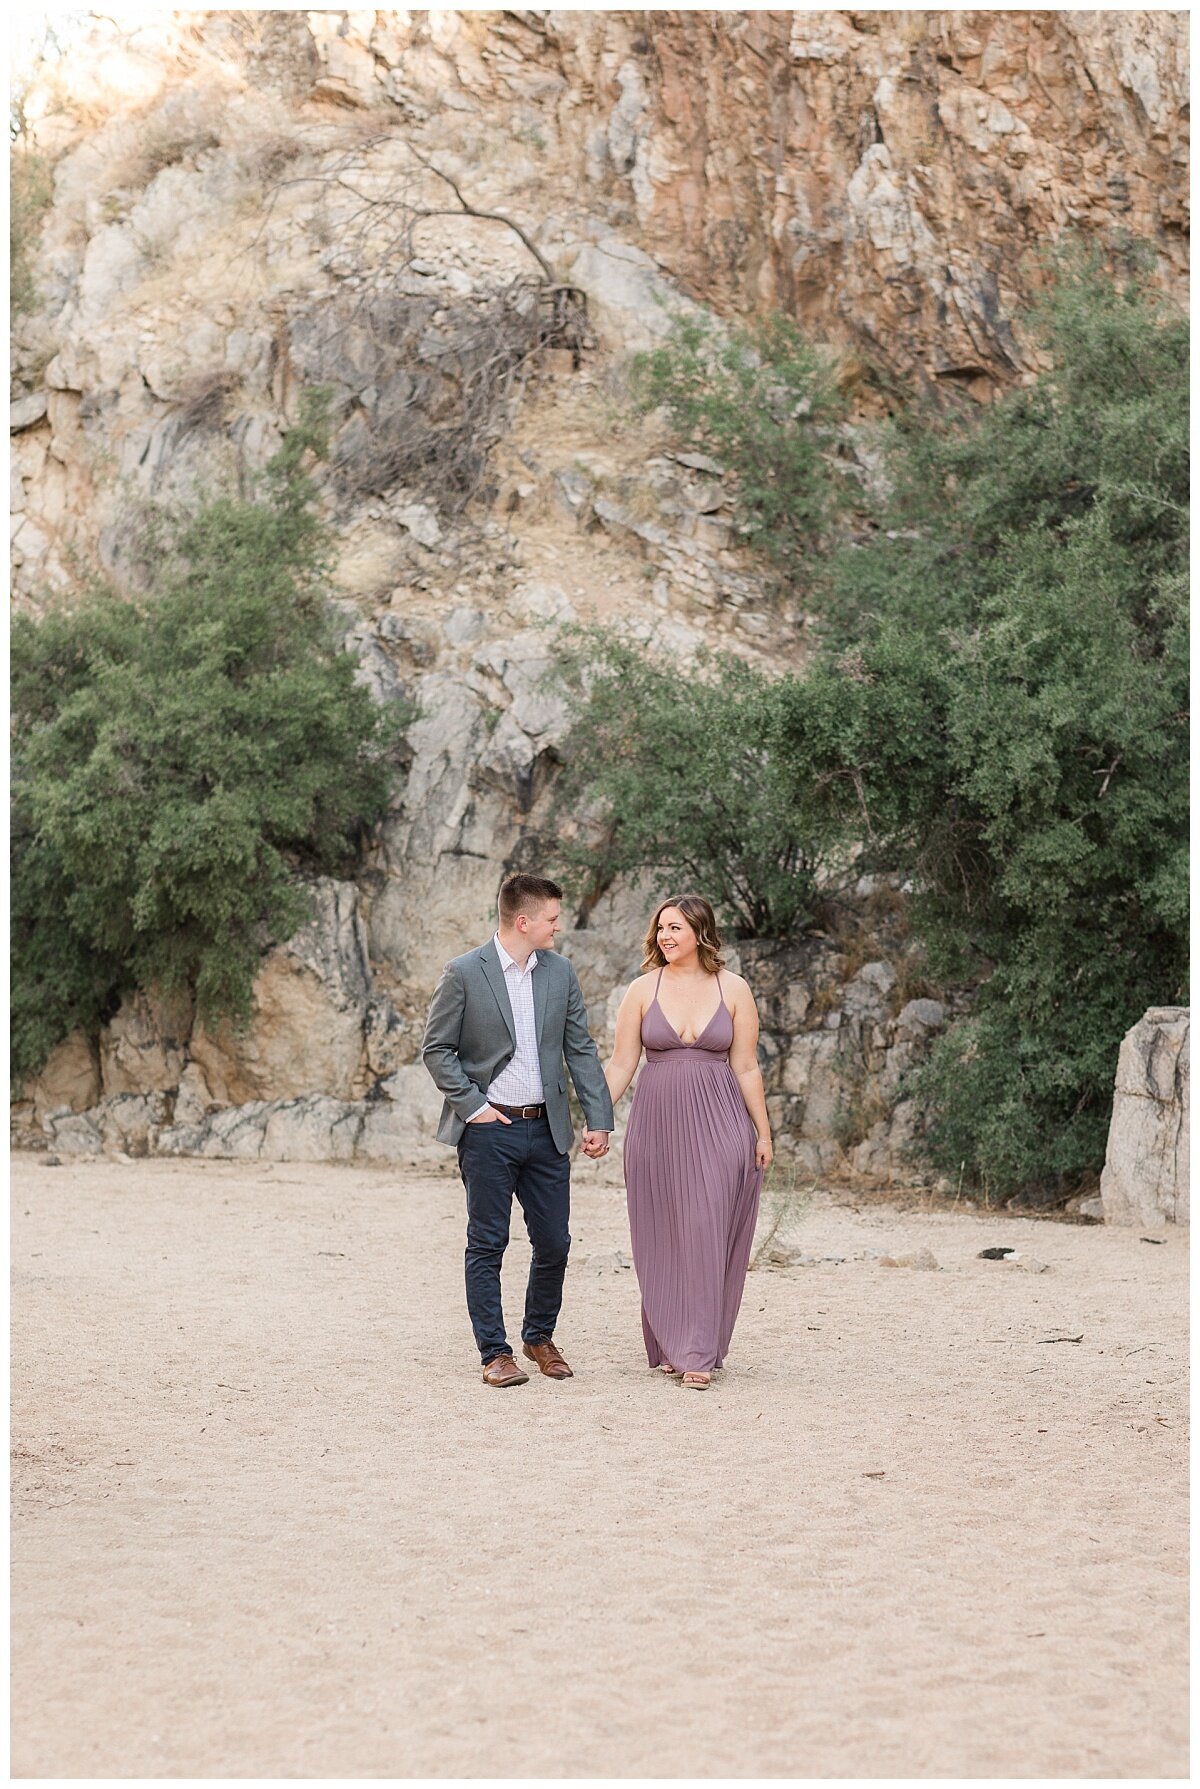 Walking in the desert Engagement Session Photos with Wedding Photographer Melissa Fritzsche Photography.